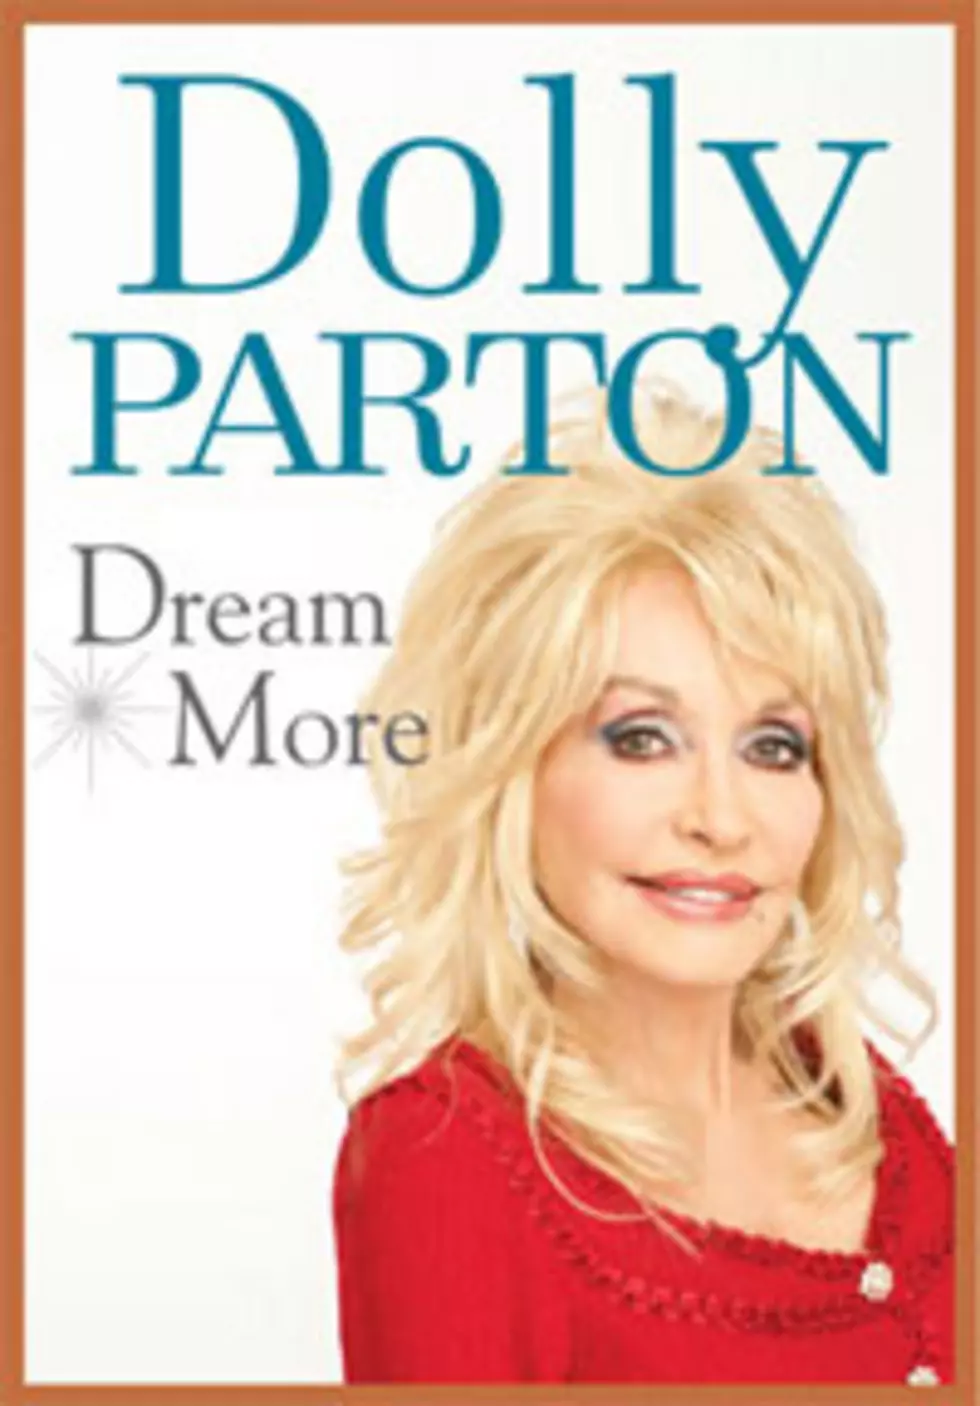 Dolly Parton, ‘Dream More’ Book Steers Clear of Advice